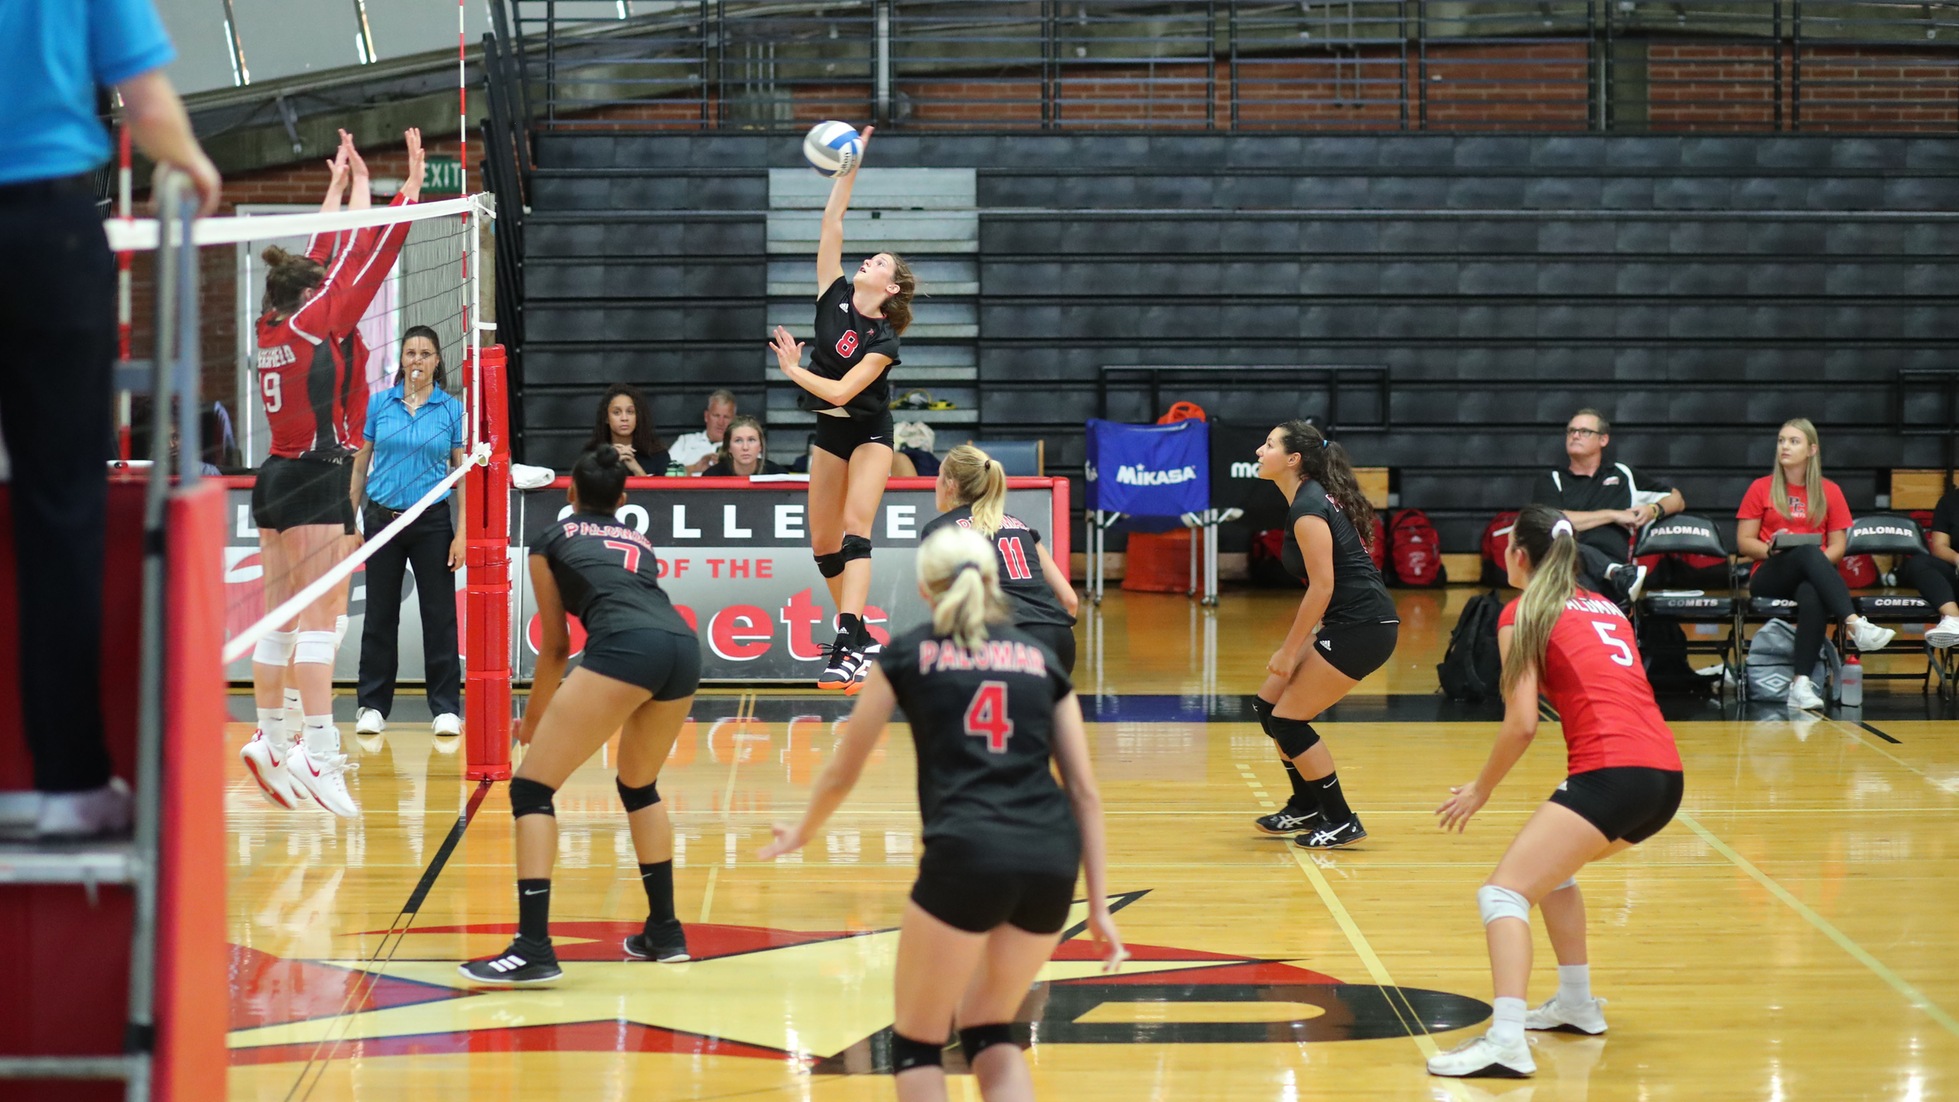 Carsyn Emerson with a kill in set three against Bakersfield. Photo by Hugh Cox.